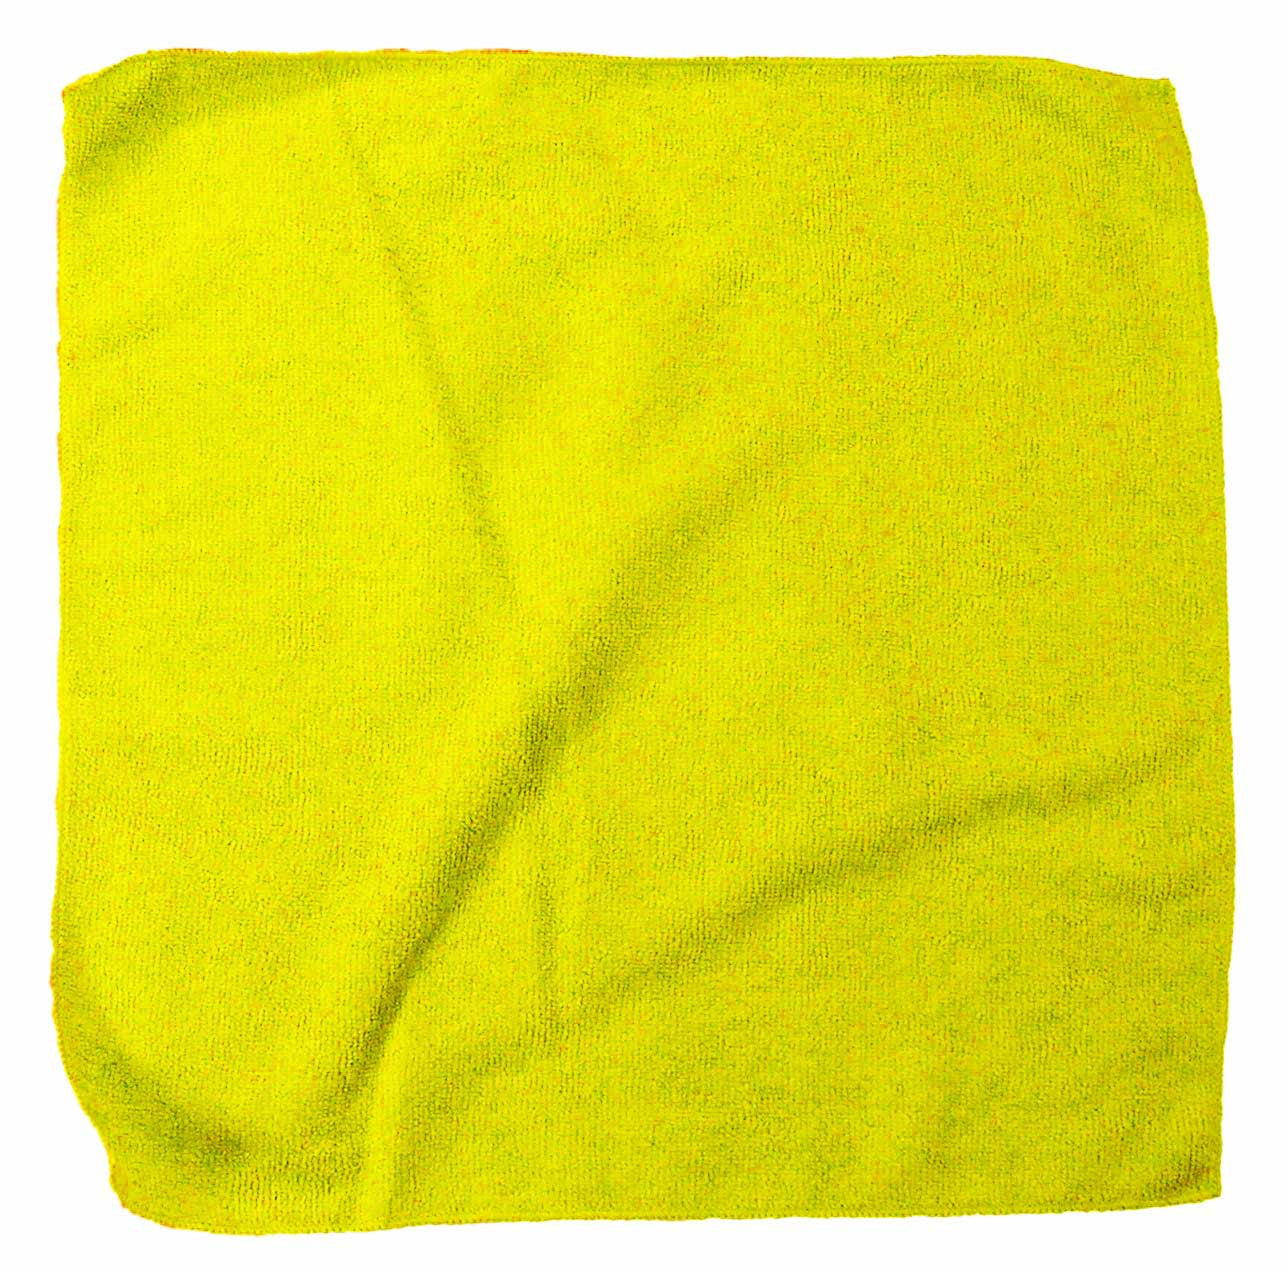 Pacific Linens Microfiber Cleaning Cloths, Towel for Cars, Windows,  Mirrors, Laptop Computer Screen, iPhone, iPad. 6 Pack 16'' x 16'' Towels  (Yellow)